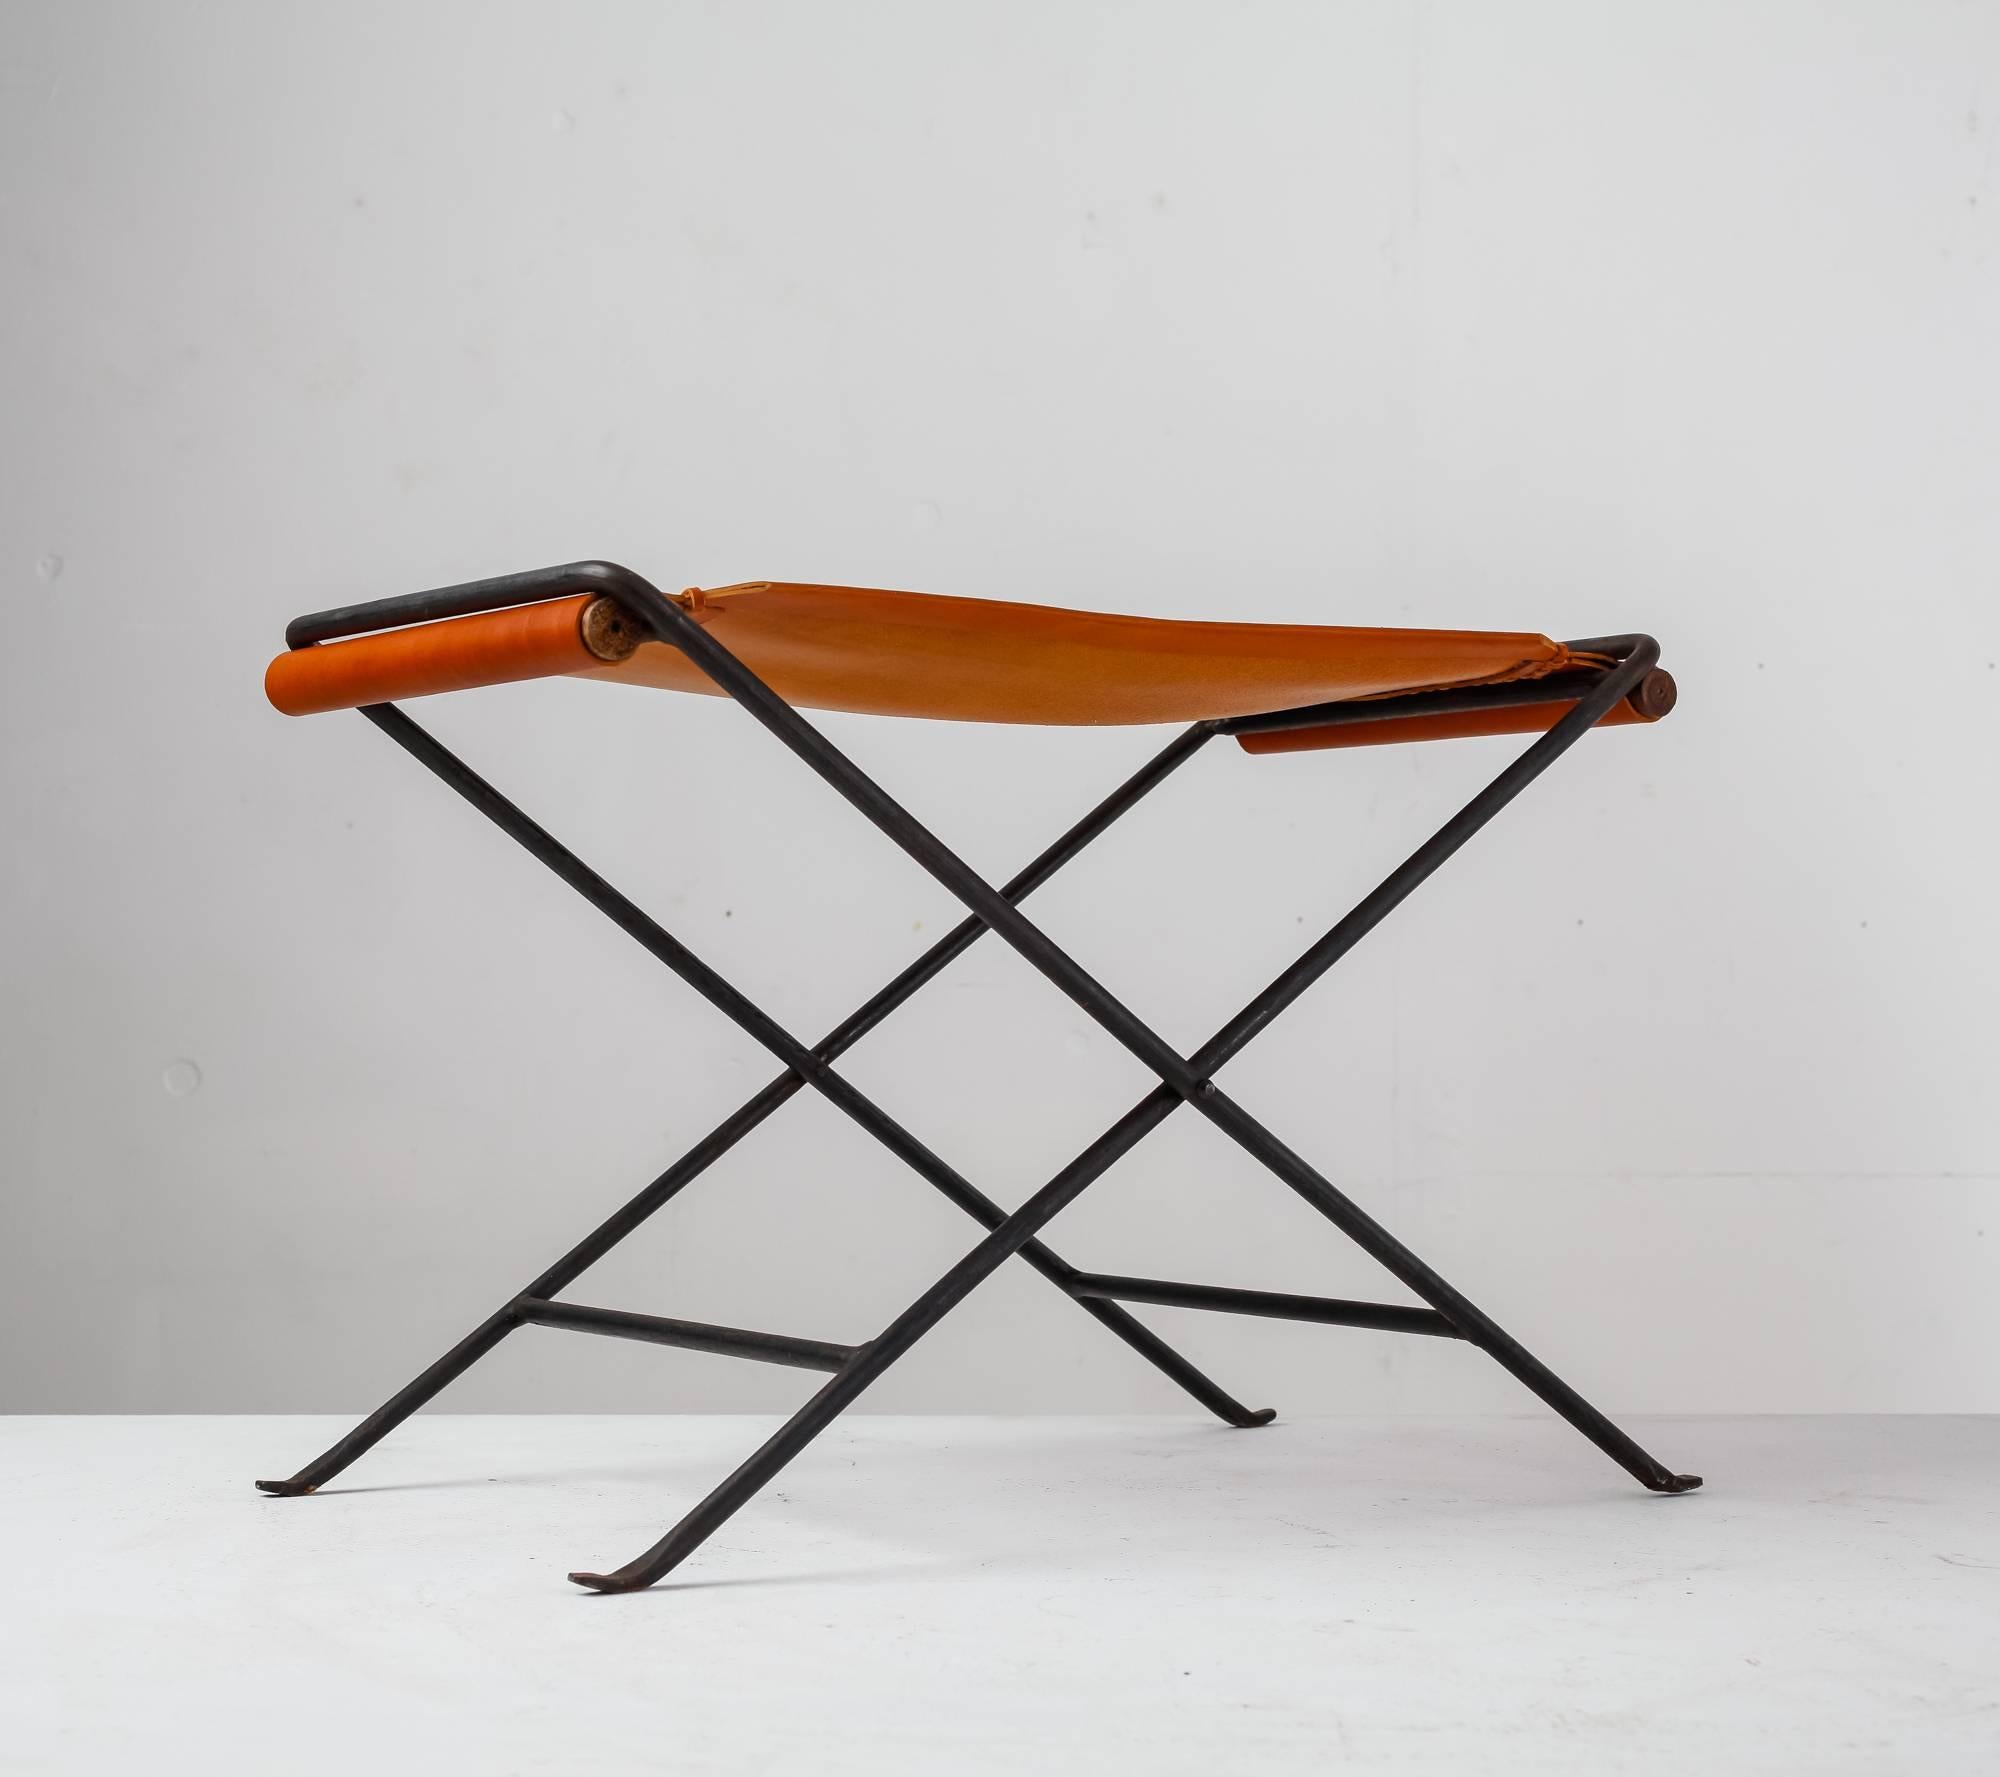 A foldable stool made of a black iron frame with a brown leather sling seat, attributeedto  Californian designer Cleo Baldon. The leather is fixed with two wooden poles. The stool has been professionally reupholstered in our in-house